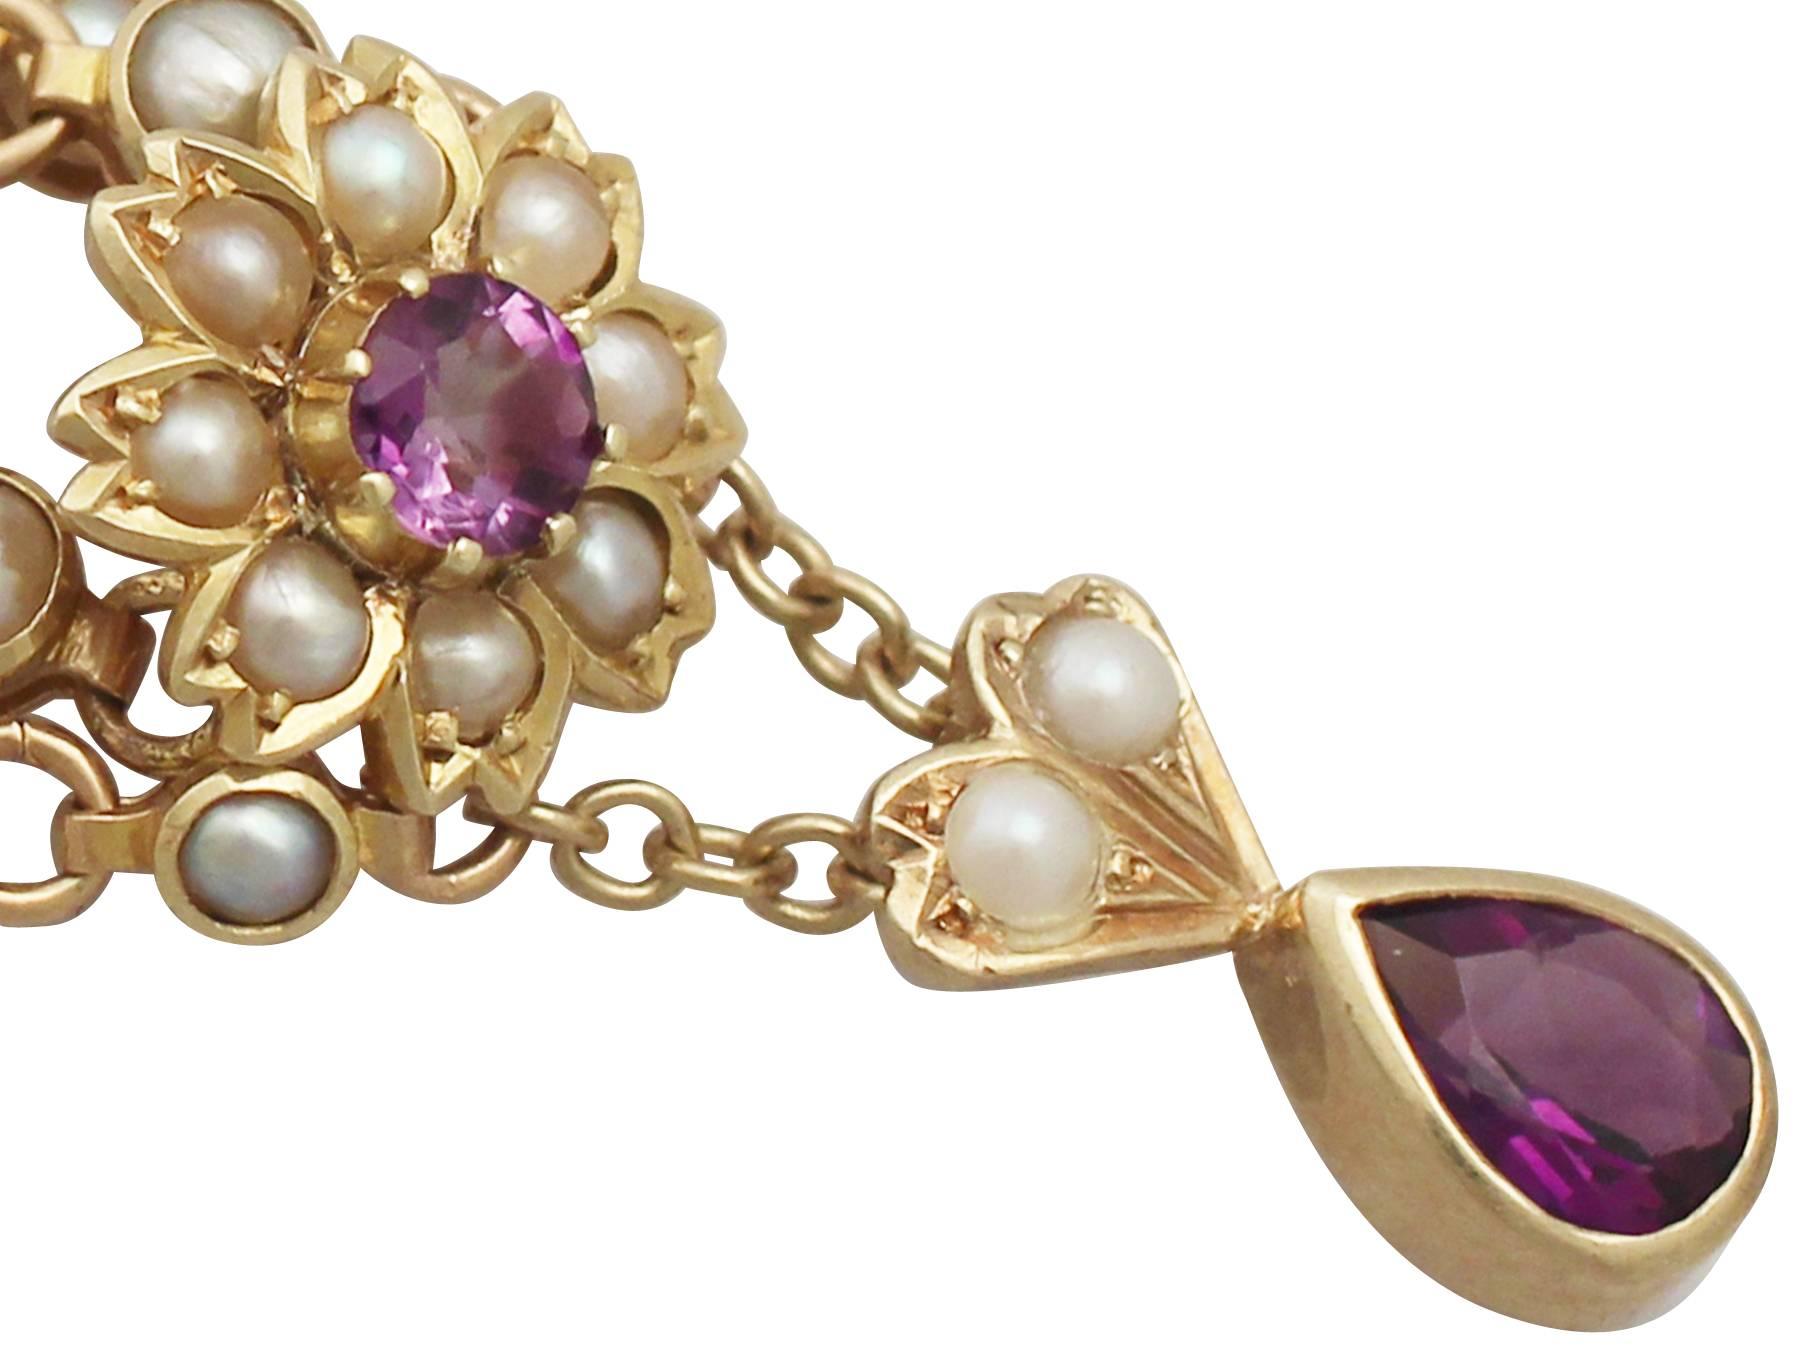 Men's 1890s  Seed Pearl and 0.90 Carat Amethyst Yellow Gold Necklace